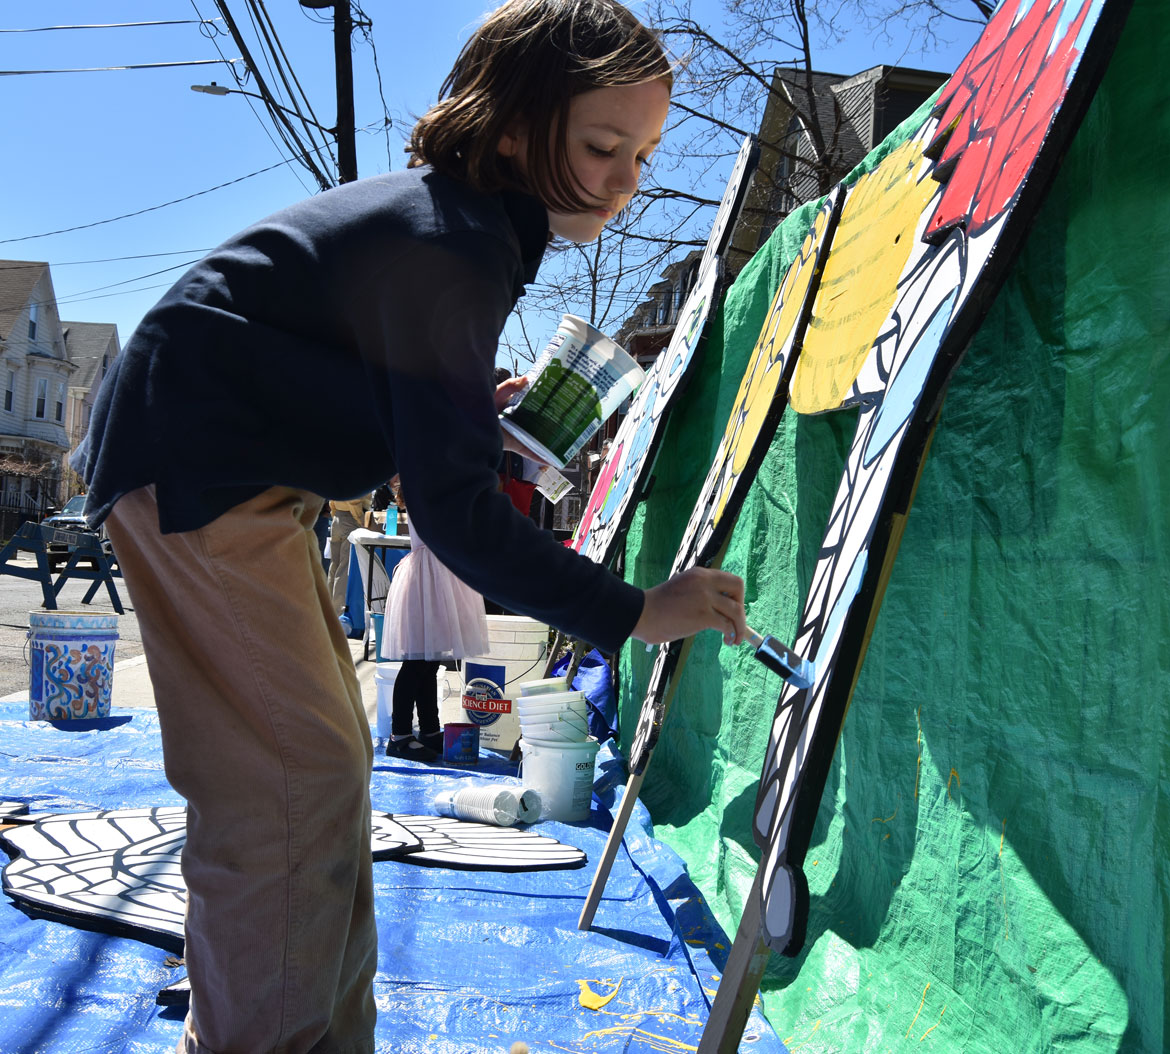 Painting mosaic-style animals designed by muralist Liz LaManche at the Starting Over Festival, Somerville, April 22, 2018. (Greg Cook)